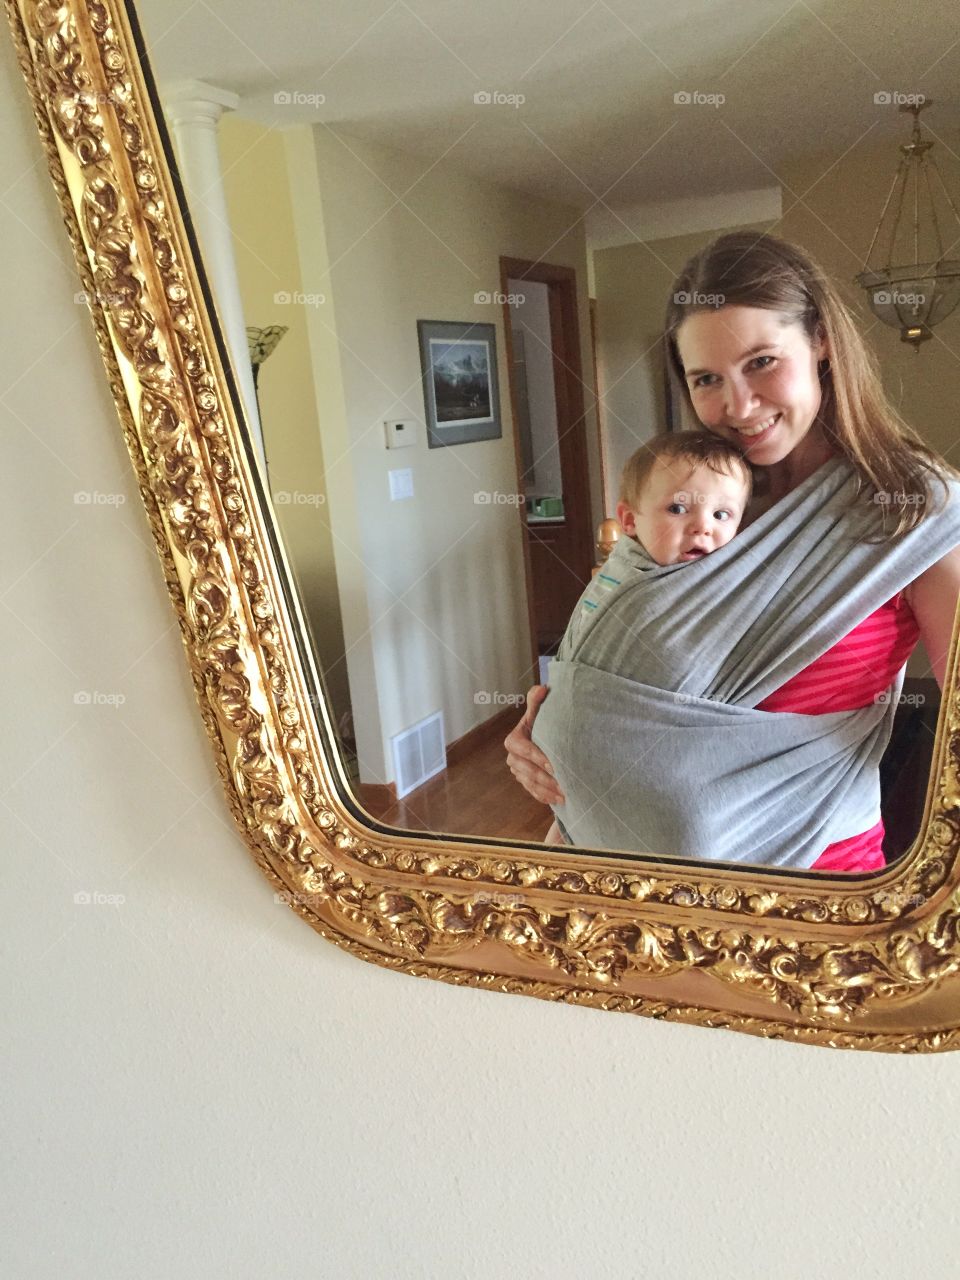 Reflection of mother carrying her cute baby boy in sling